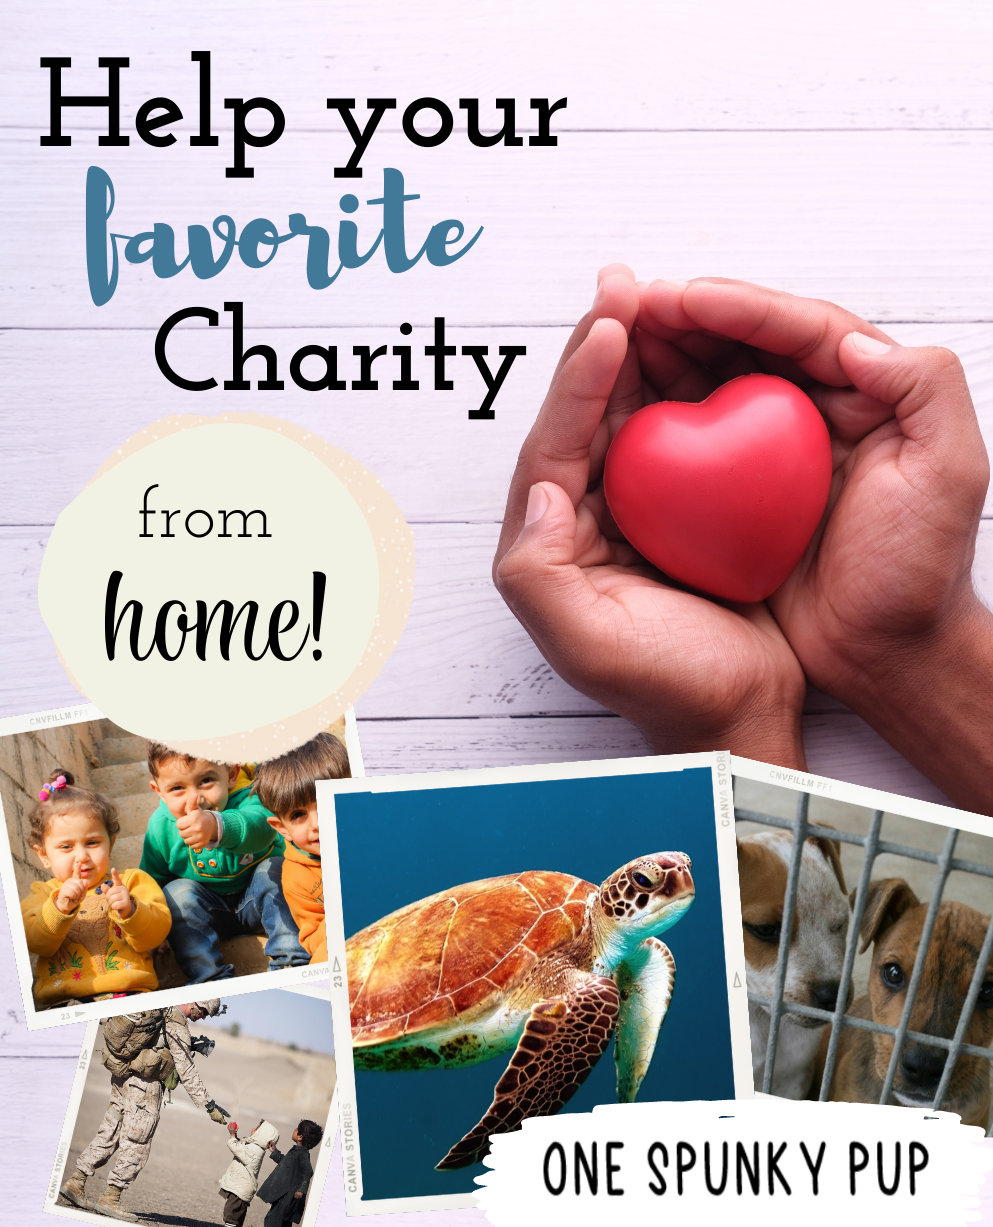 Easy ways to help out your favorite cause from home. Start doing good today (it's easier than you think!) 